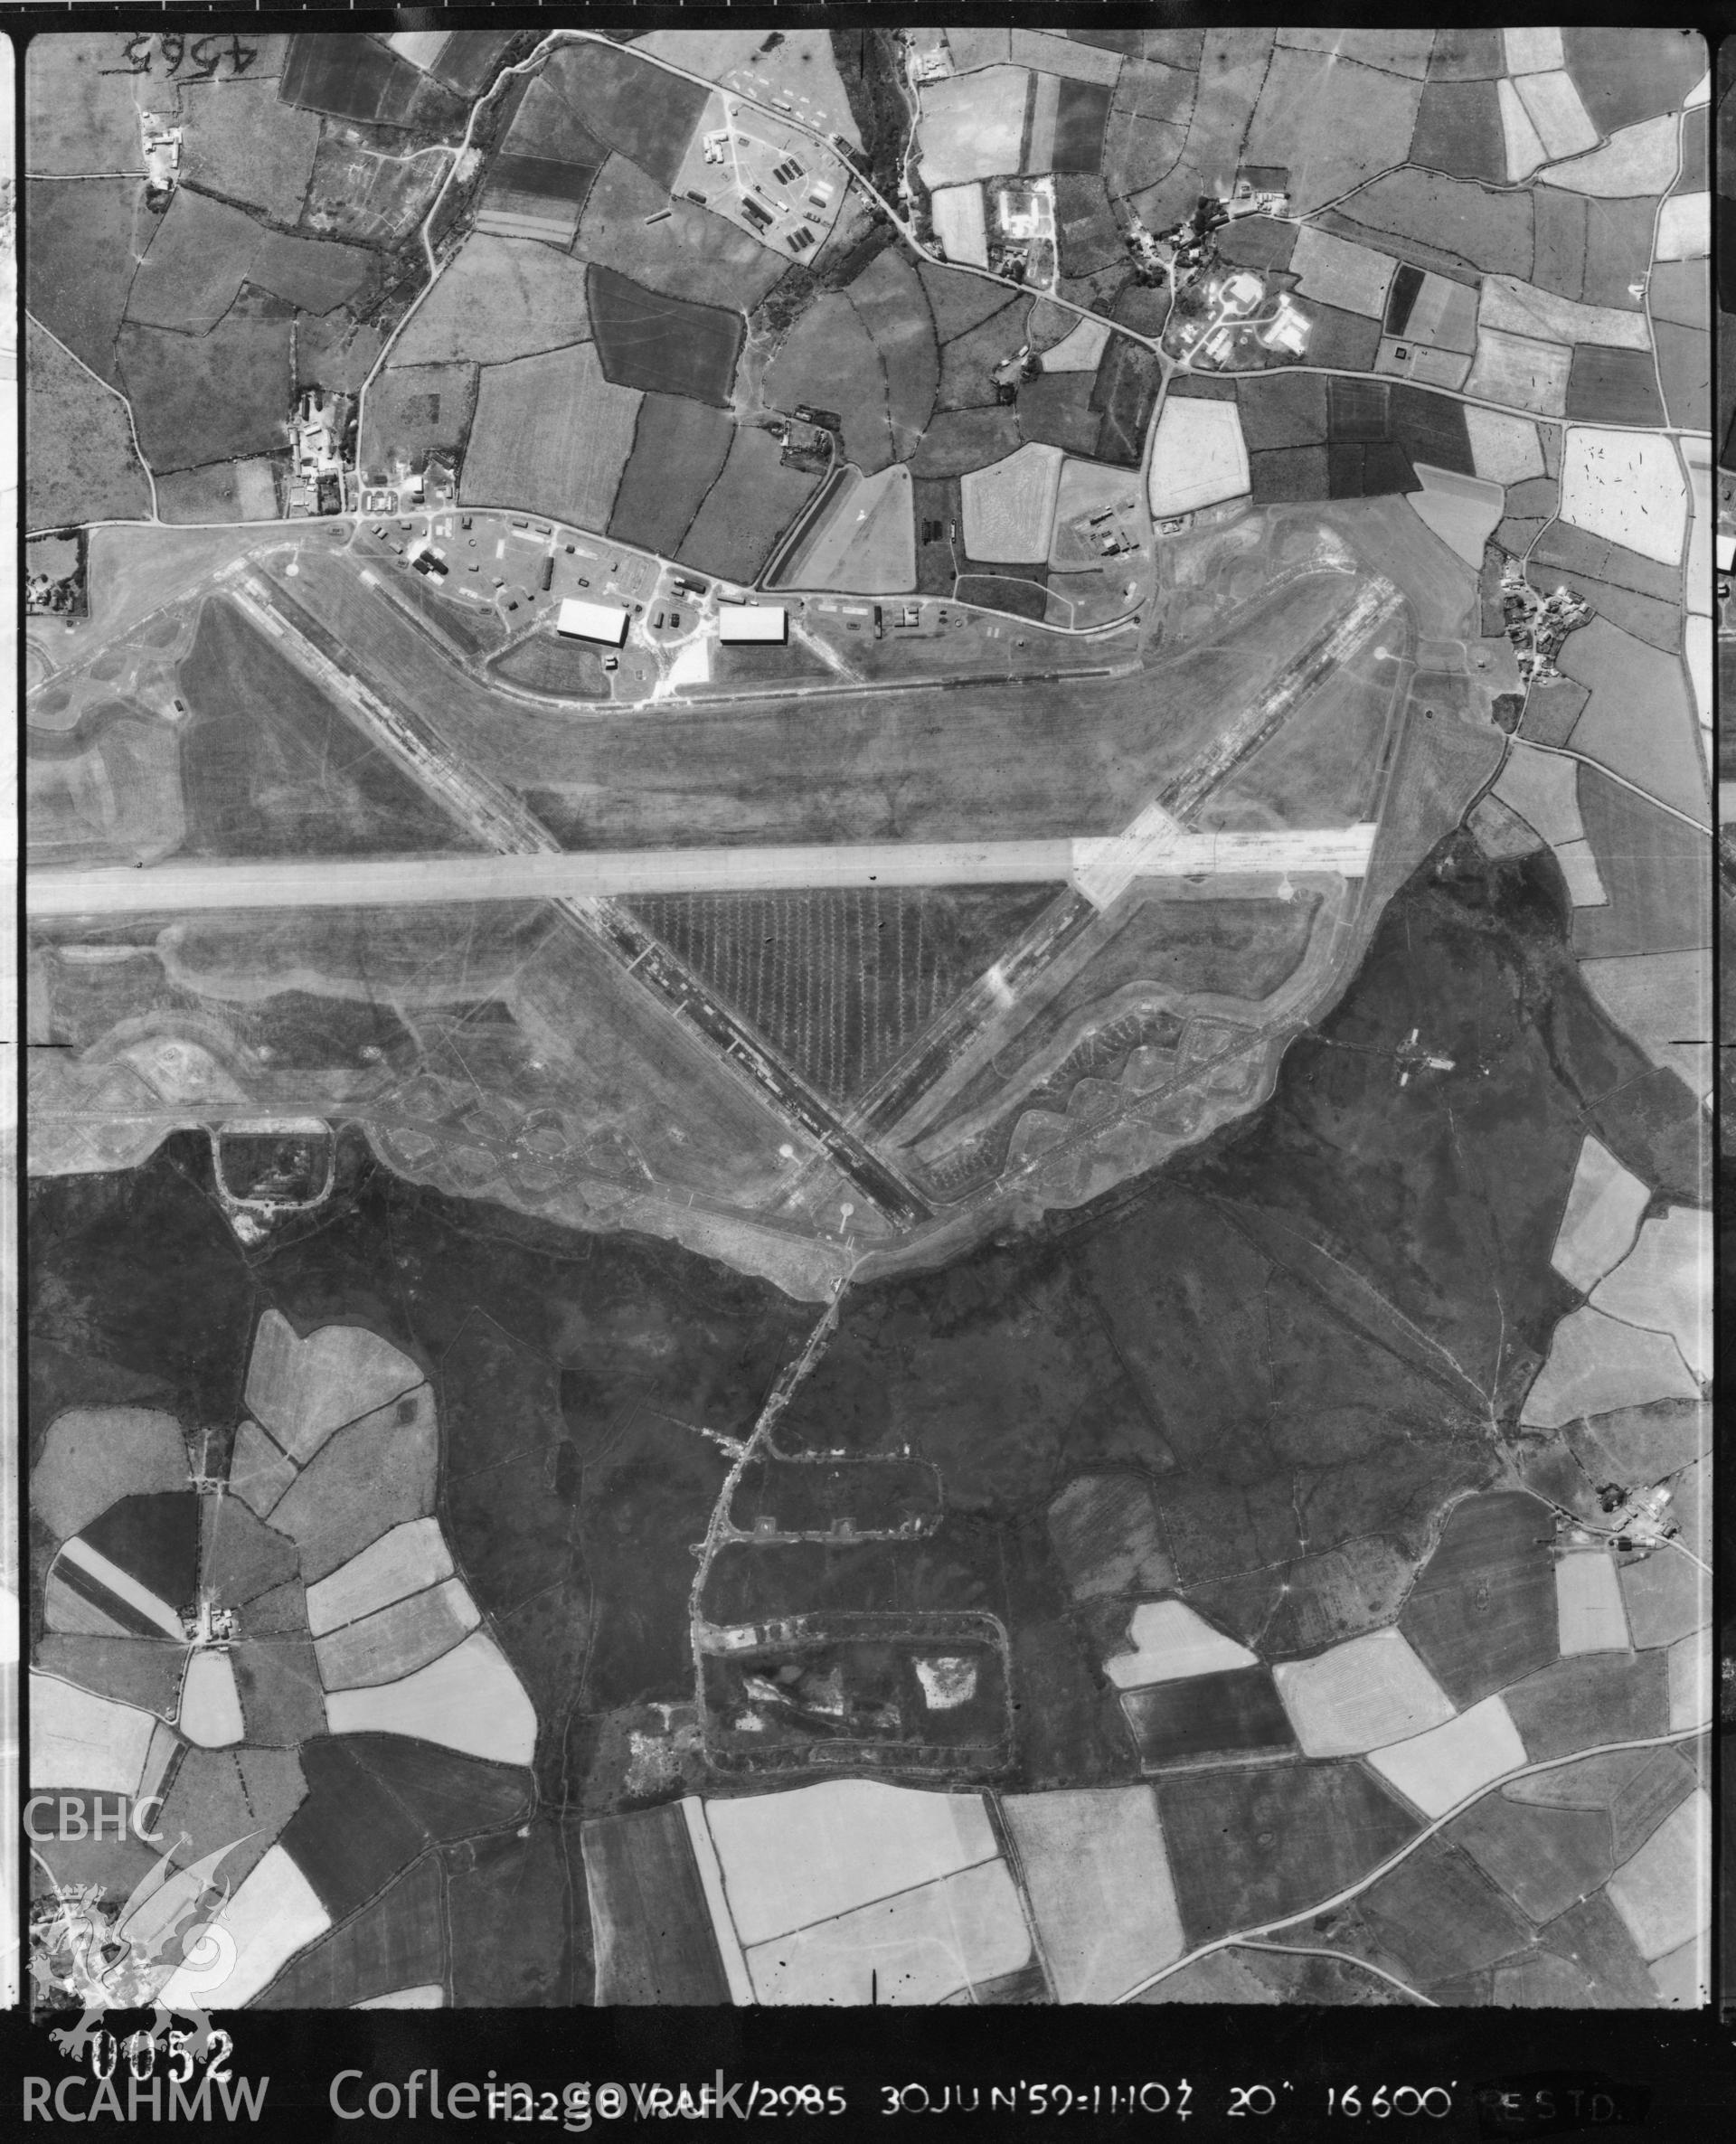 Black and white vertical aerial photograph, taken by the RAF in 1959, showing  the area around Solva.